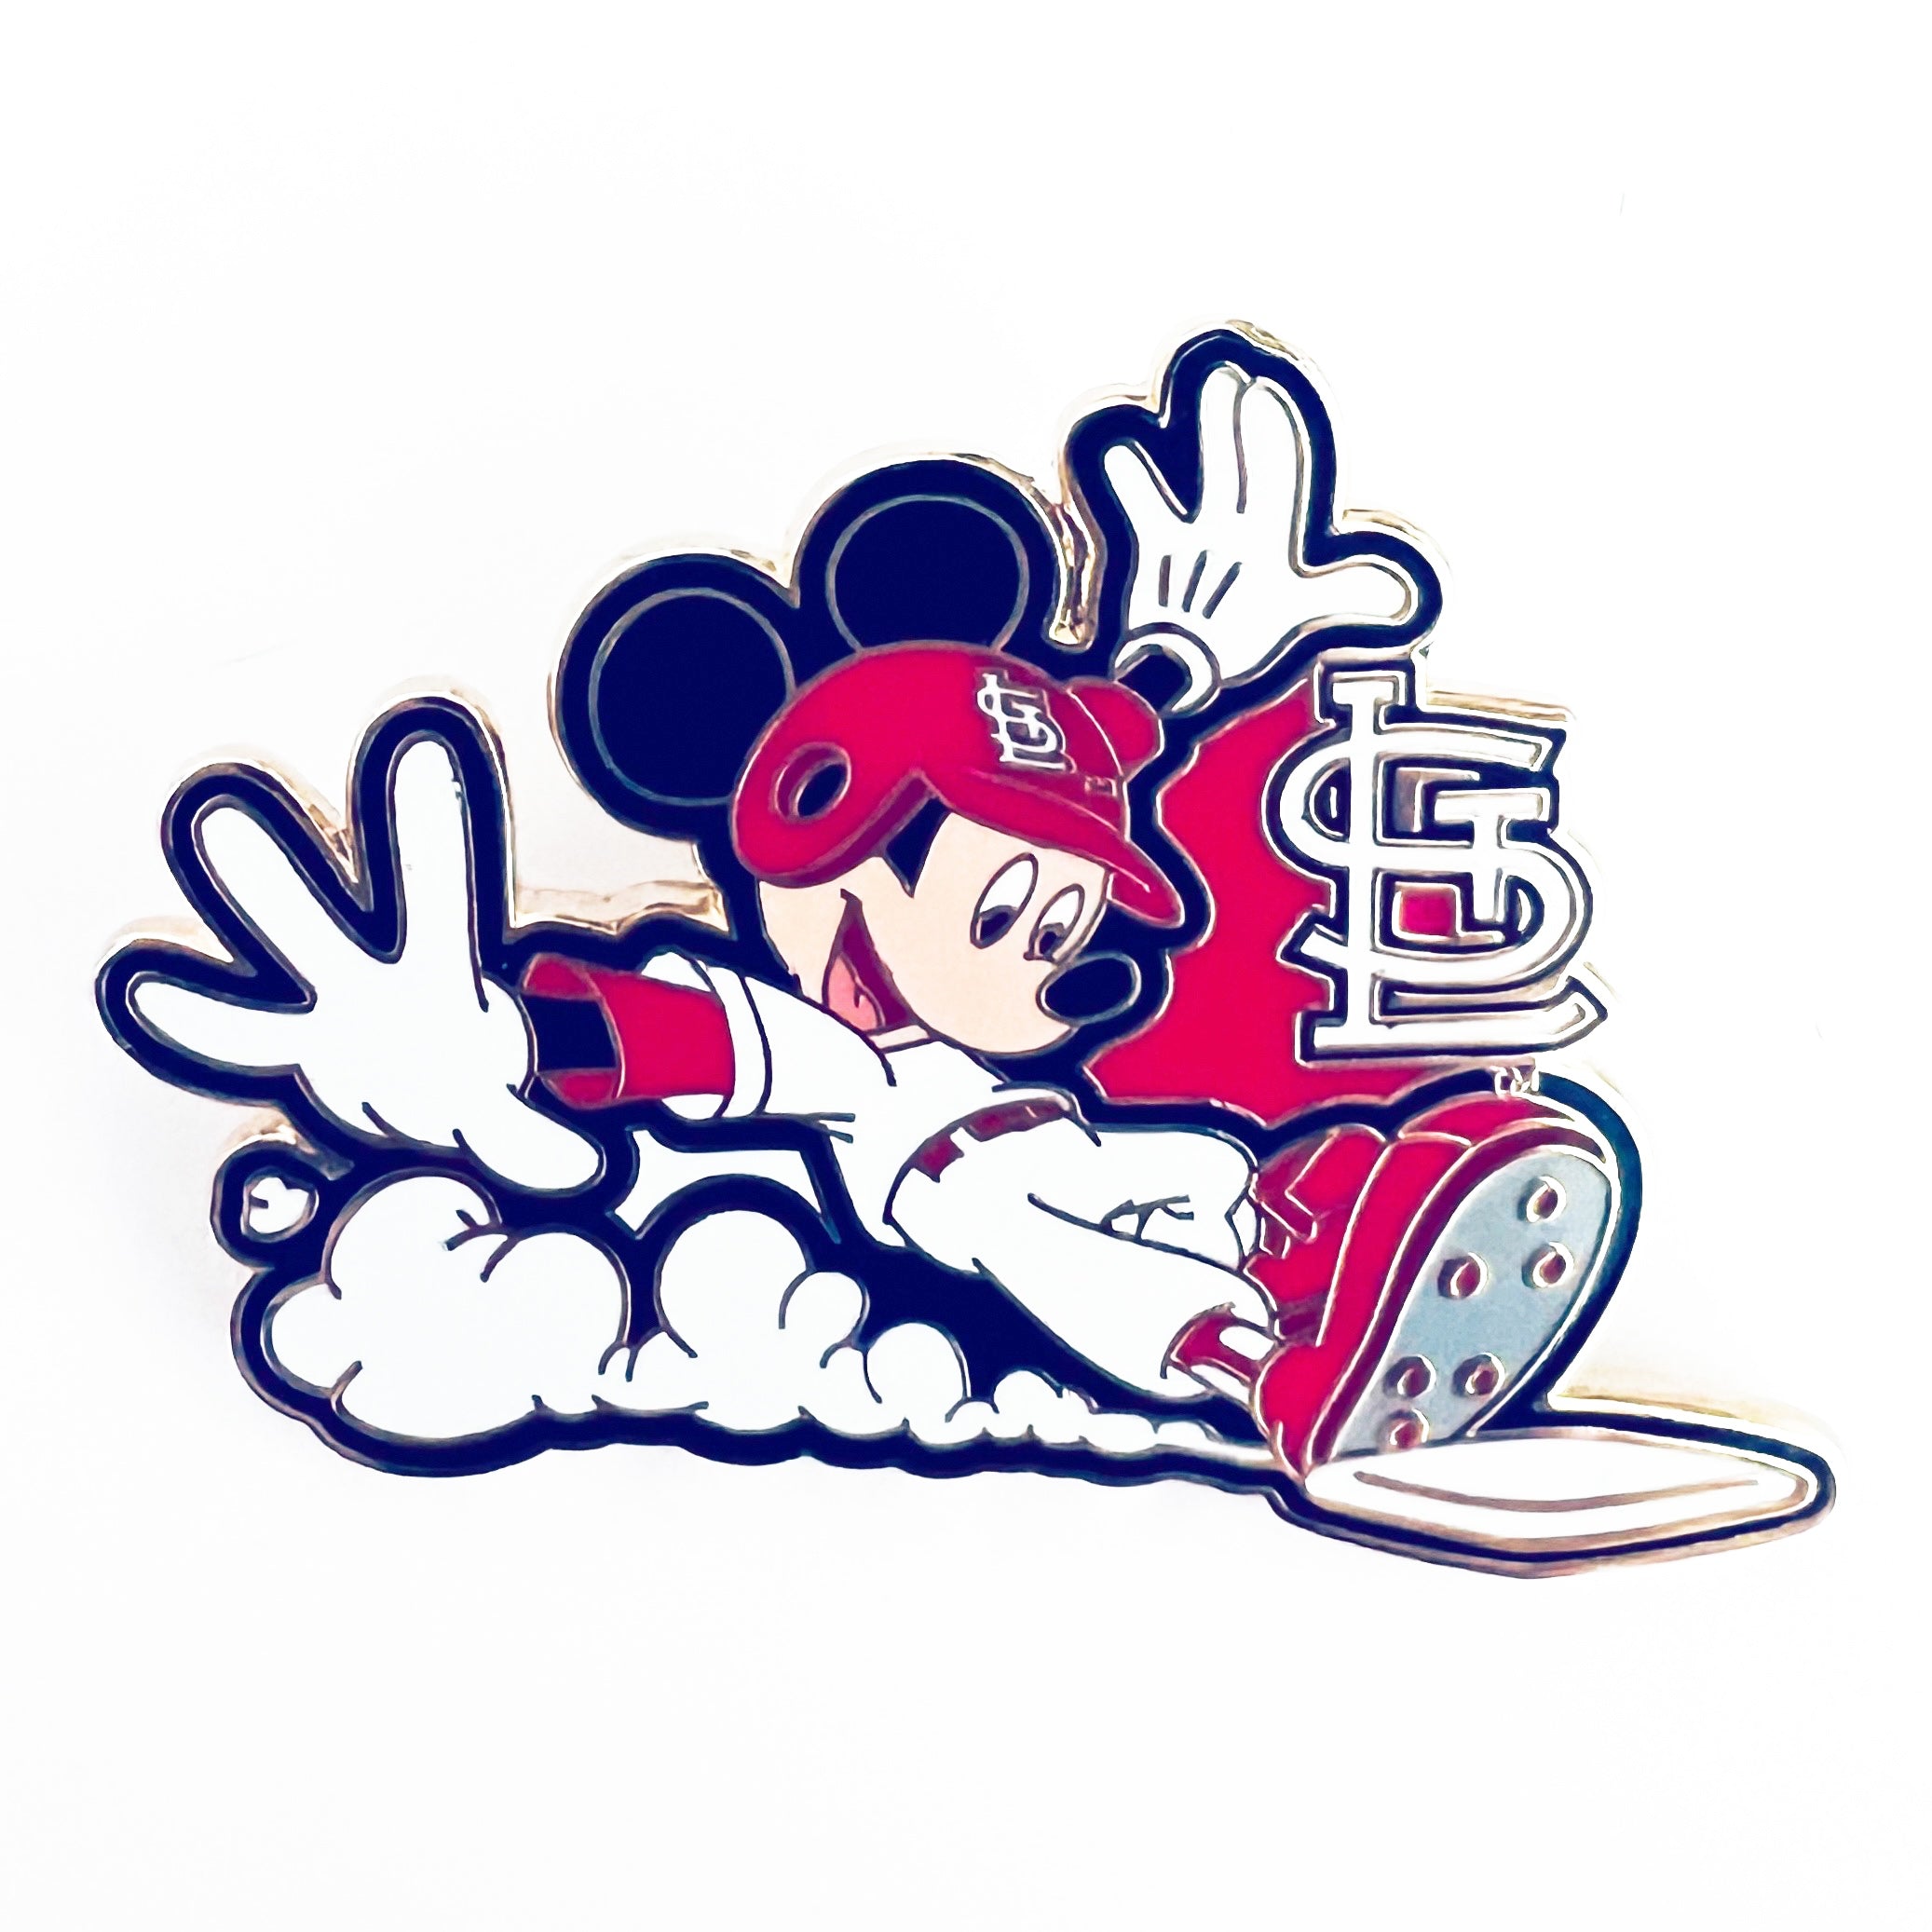 Disney Mickey Mouse Baseball Player St. Louis Cardinals Pin – The Stand  Alone